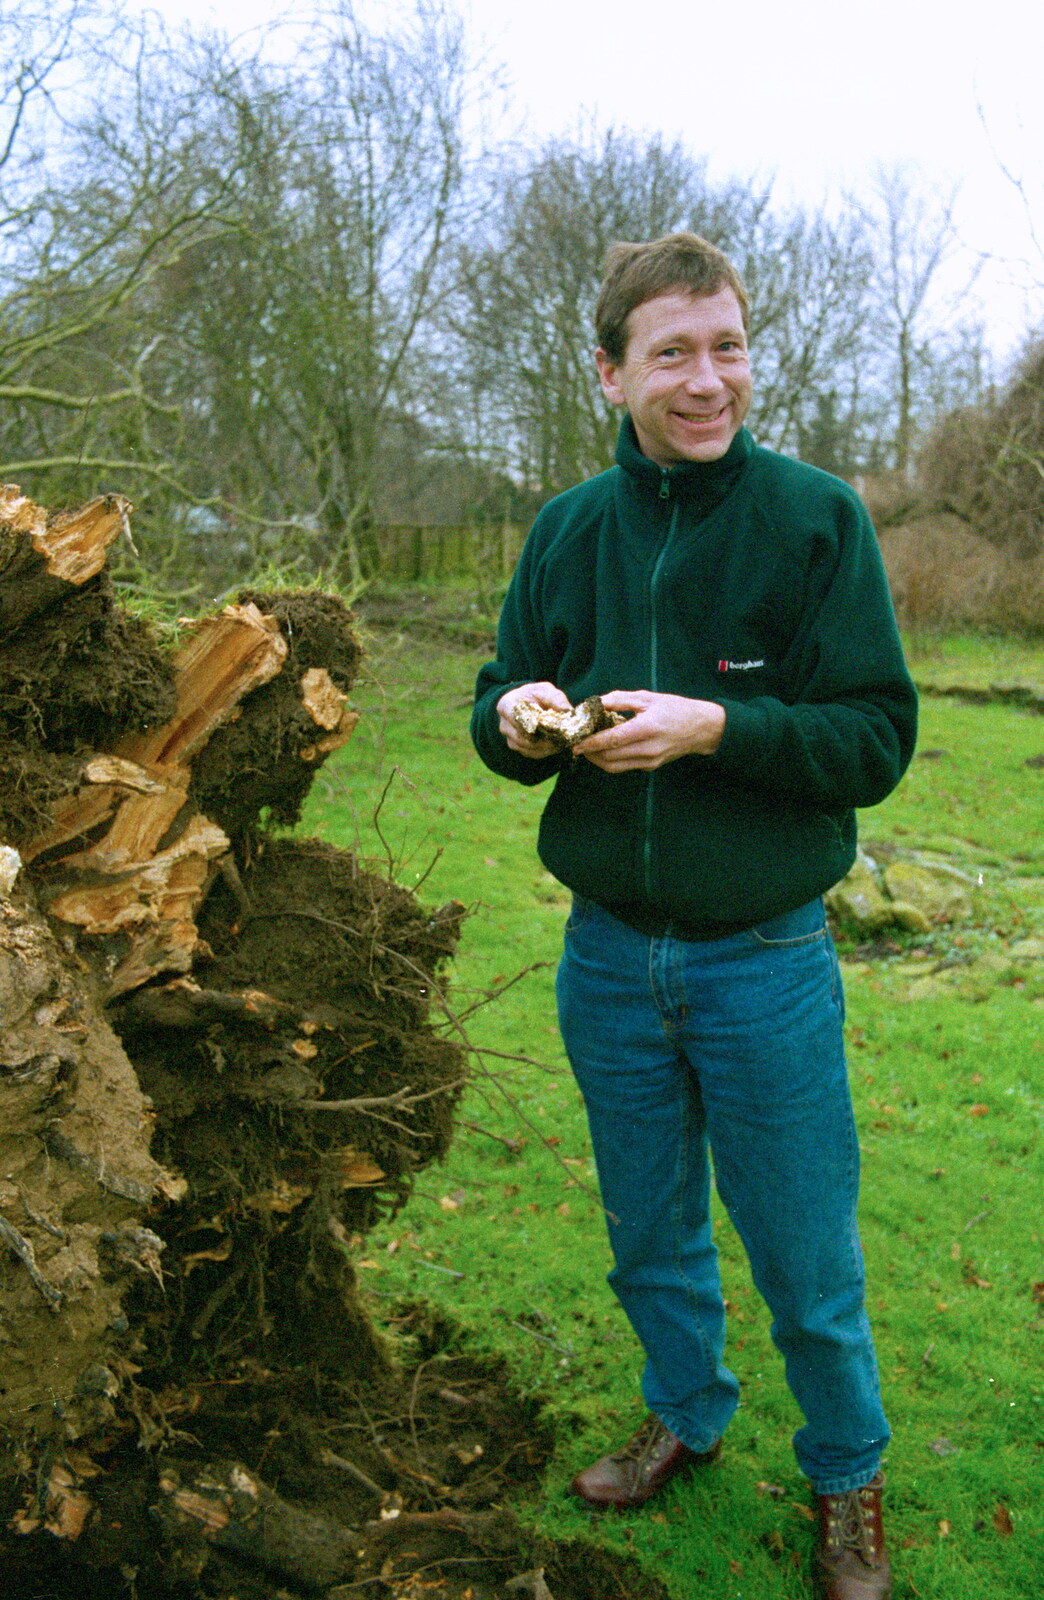 A Fallen Tree at The Swan, Brome, Suffolk - January 21st 2001: Apple inspects the fungal destroyer